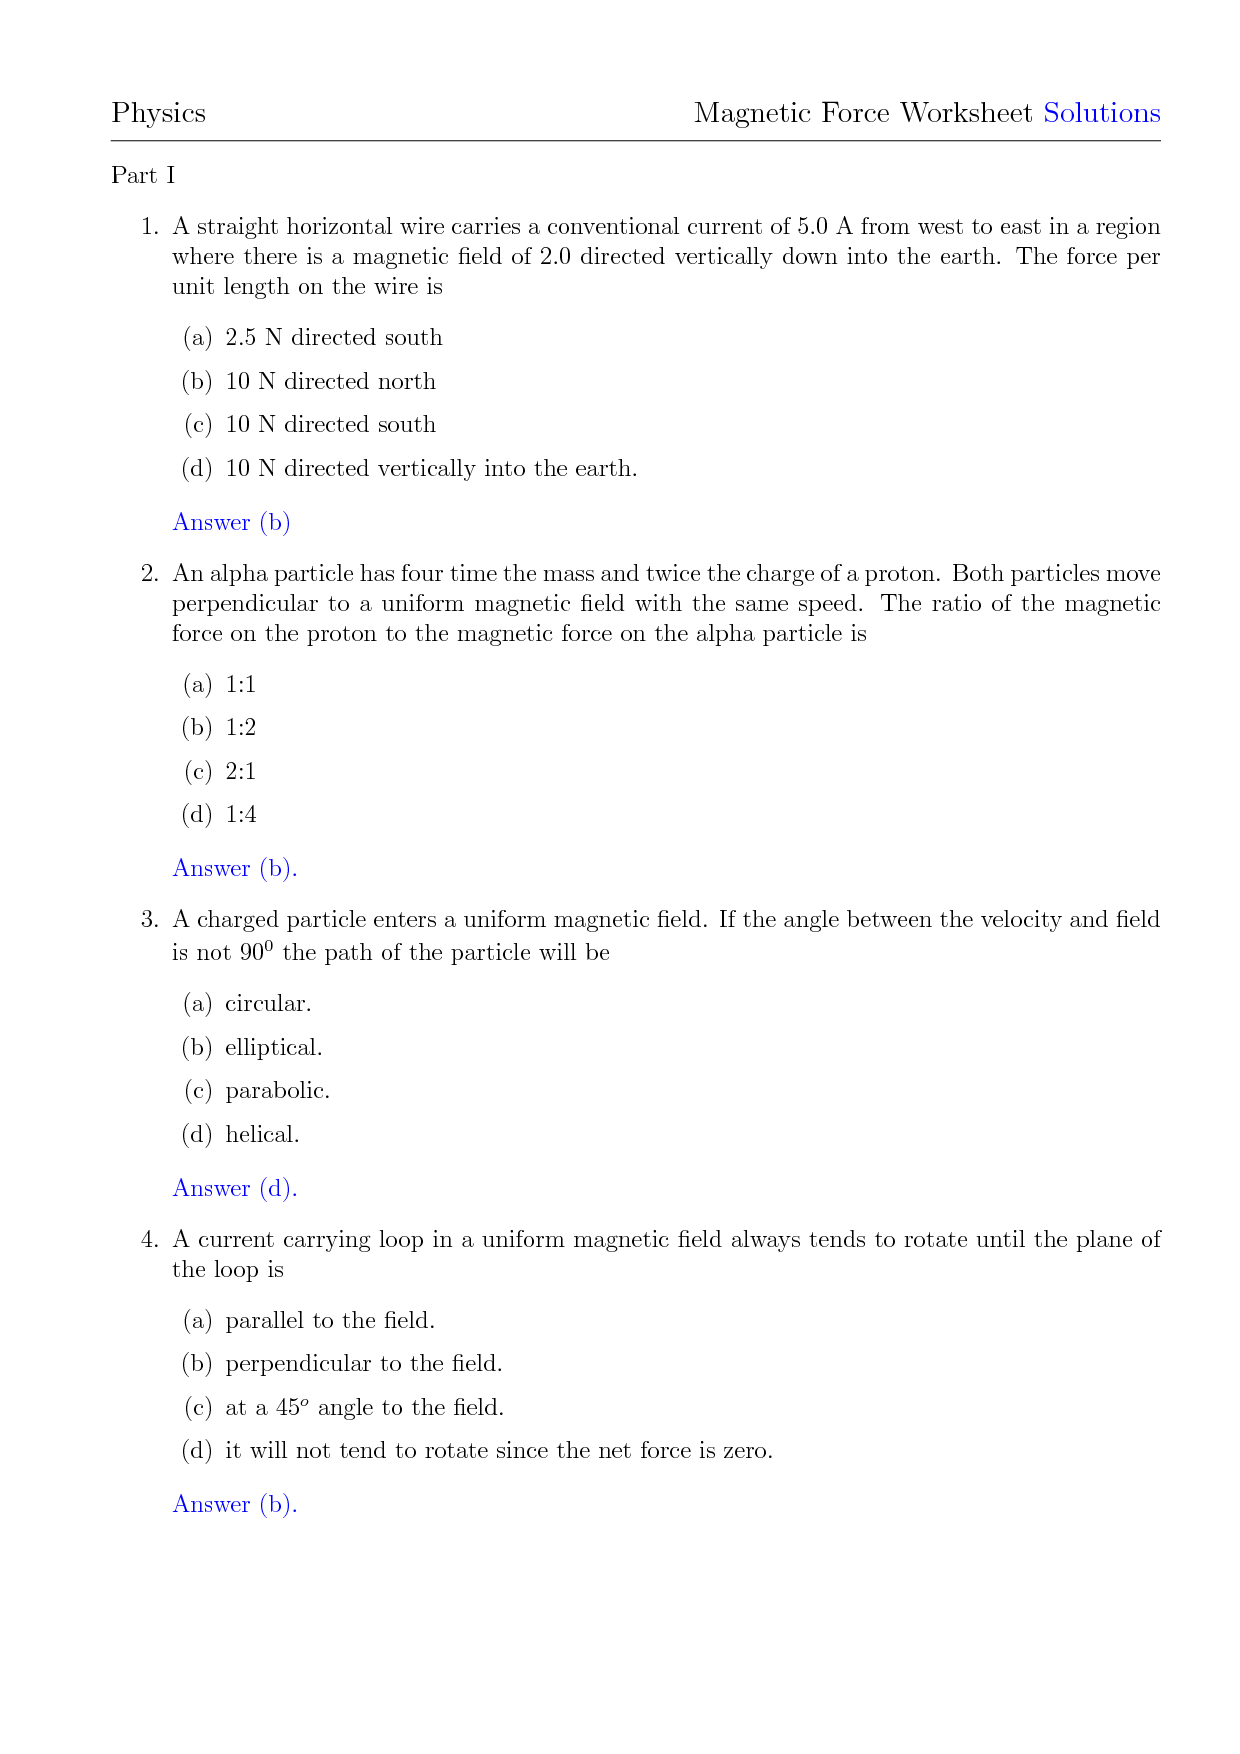 physics-worksheets-with-answers-worksheets-master